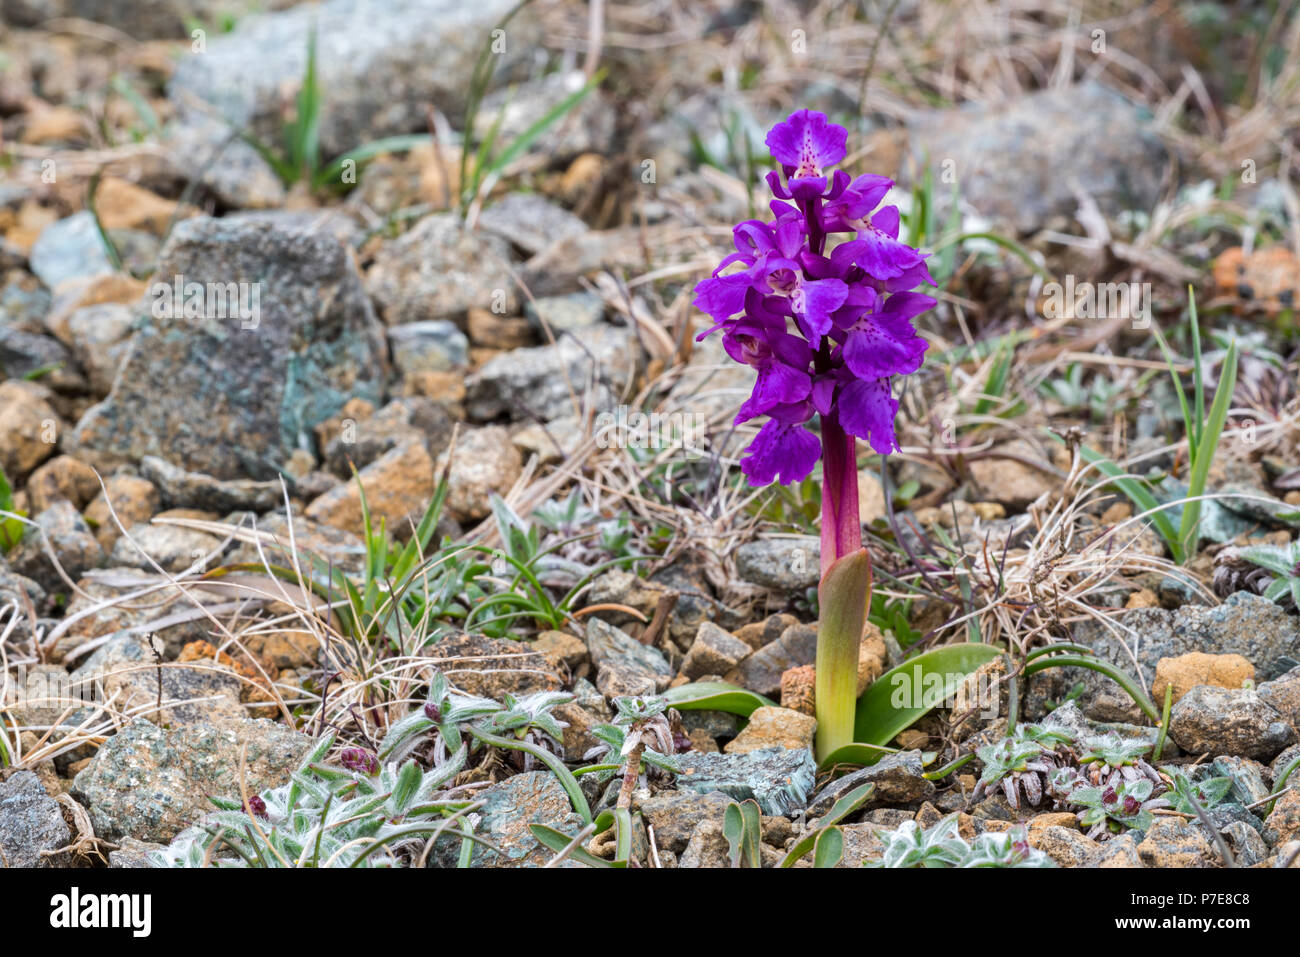 Early-purple orchid (Orchis mascula) in flower, Keen of Hamar, Unst, Shetland Islands, Scotland, UK Stock Photo